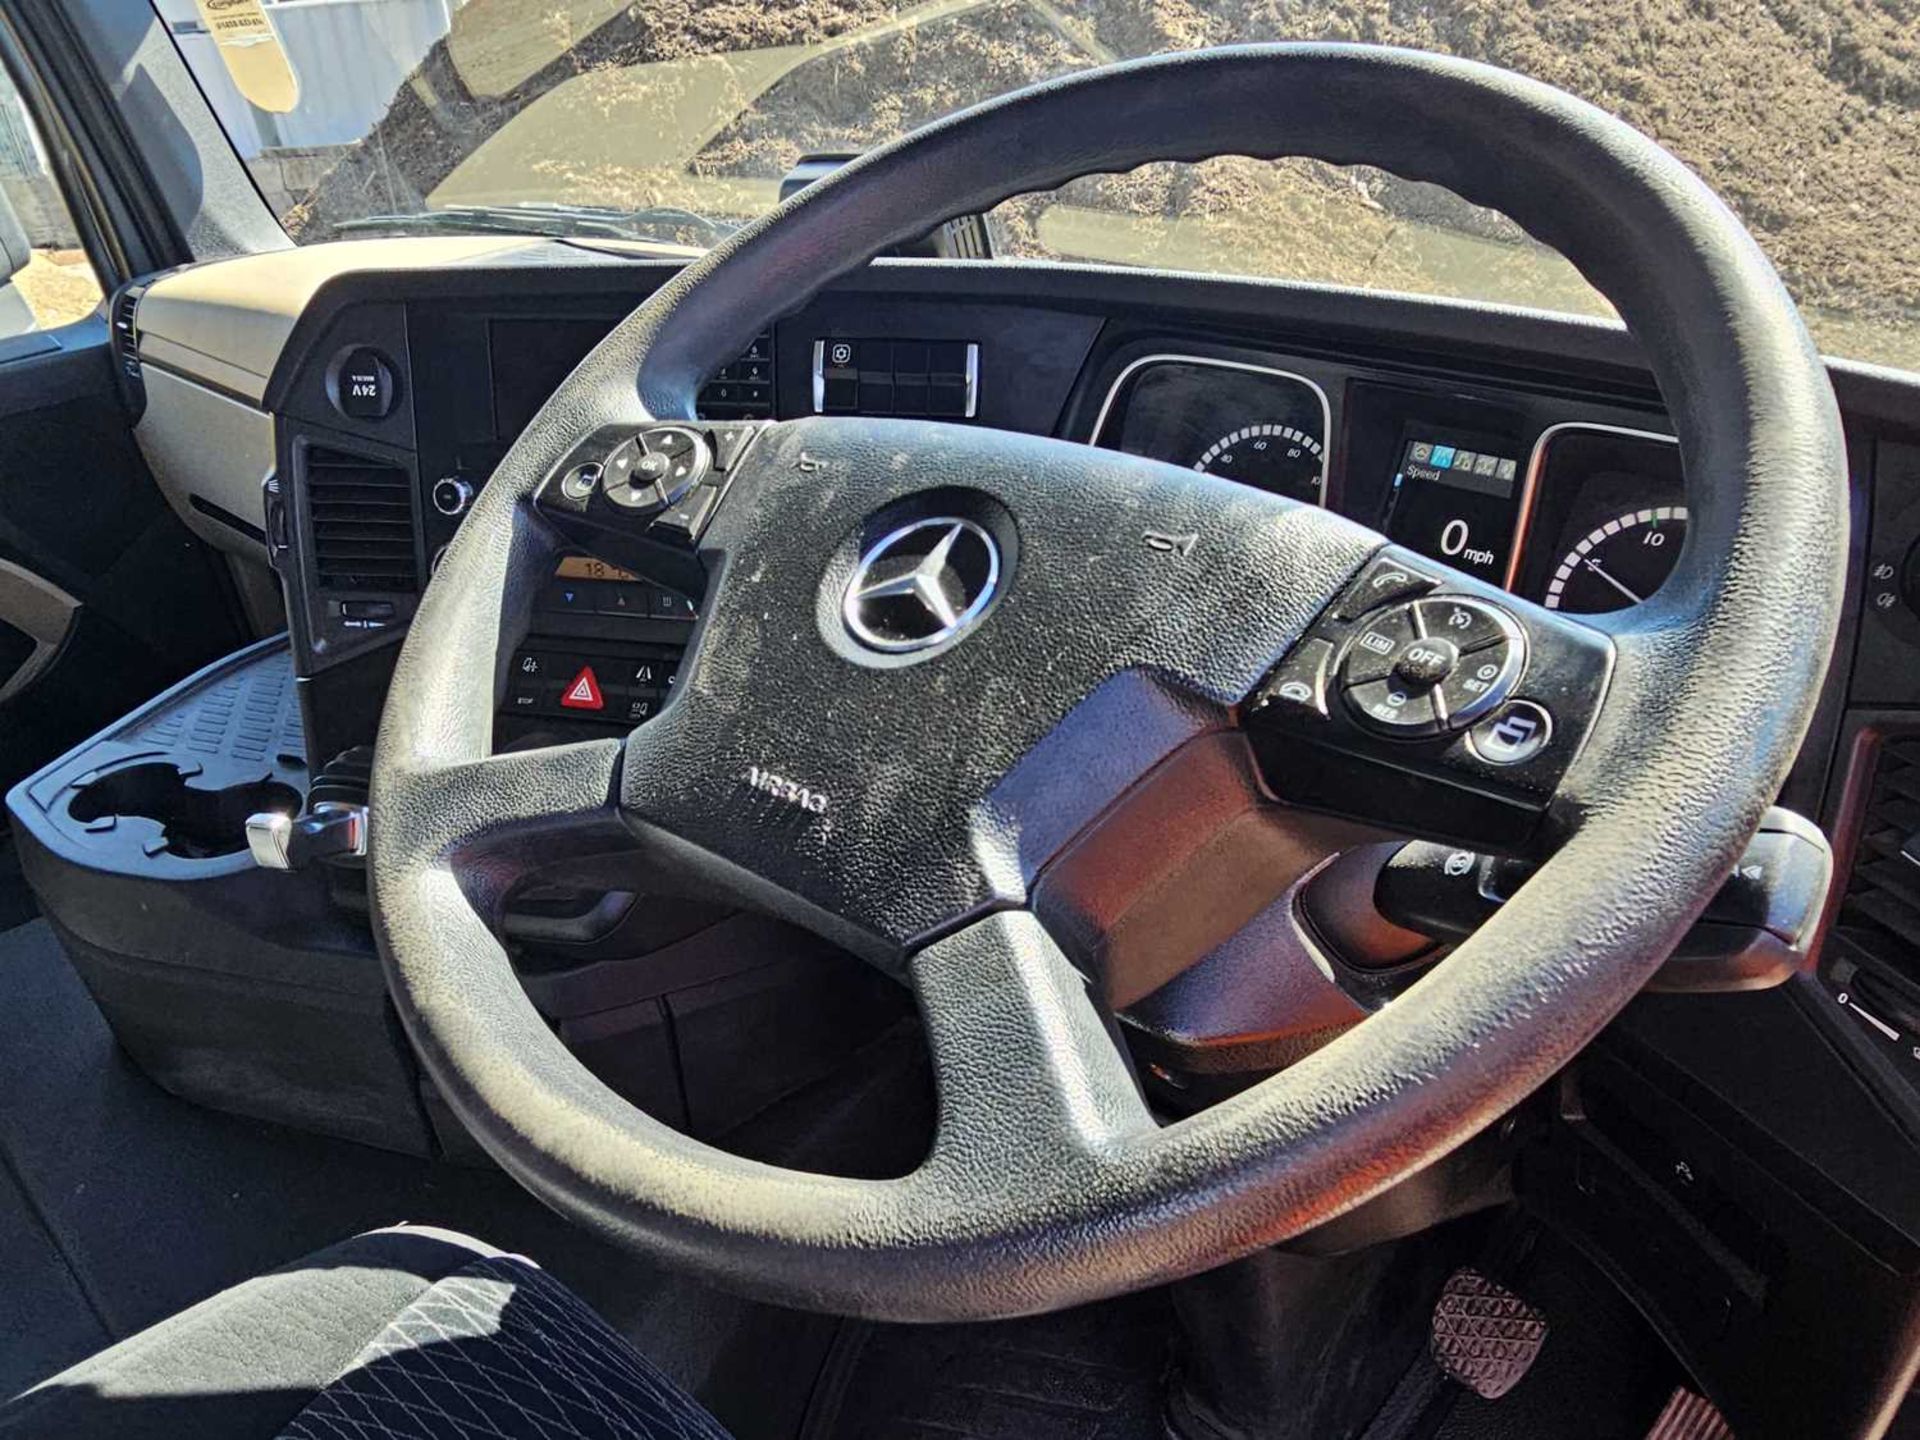 2018 Mercedes Actros 2446 6x2 Mid Lift, A/C - Image 16 of 21